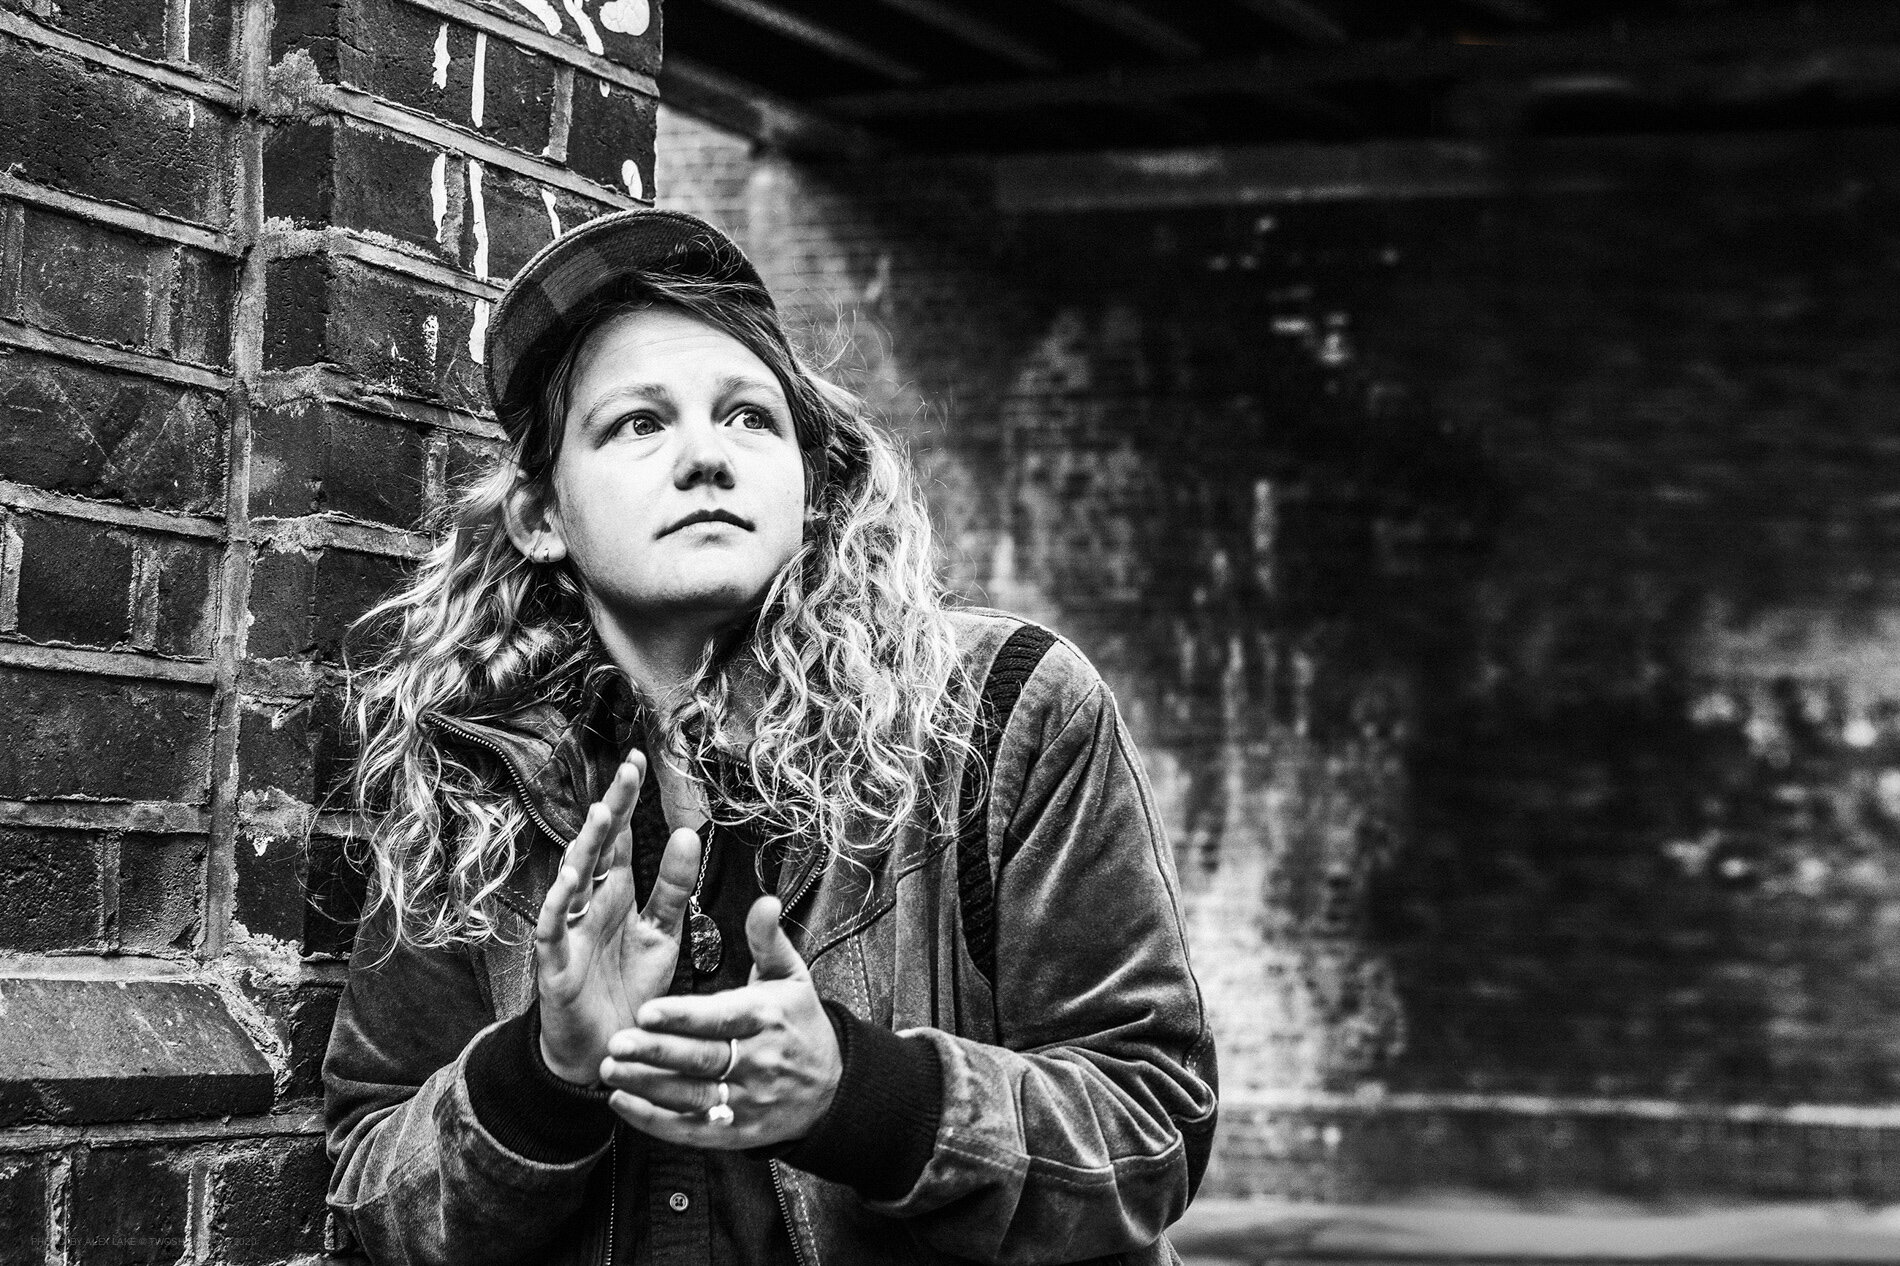 kate_tempest_photography_copyright_ALEX_LAKE_do_not_reproduce_without_permission_TWOSHORTDAYS.jpg